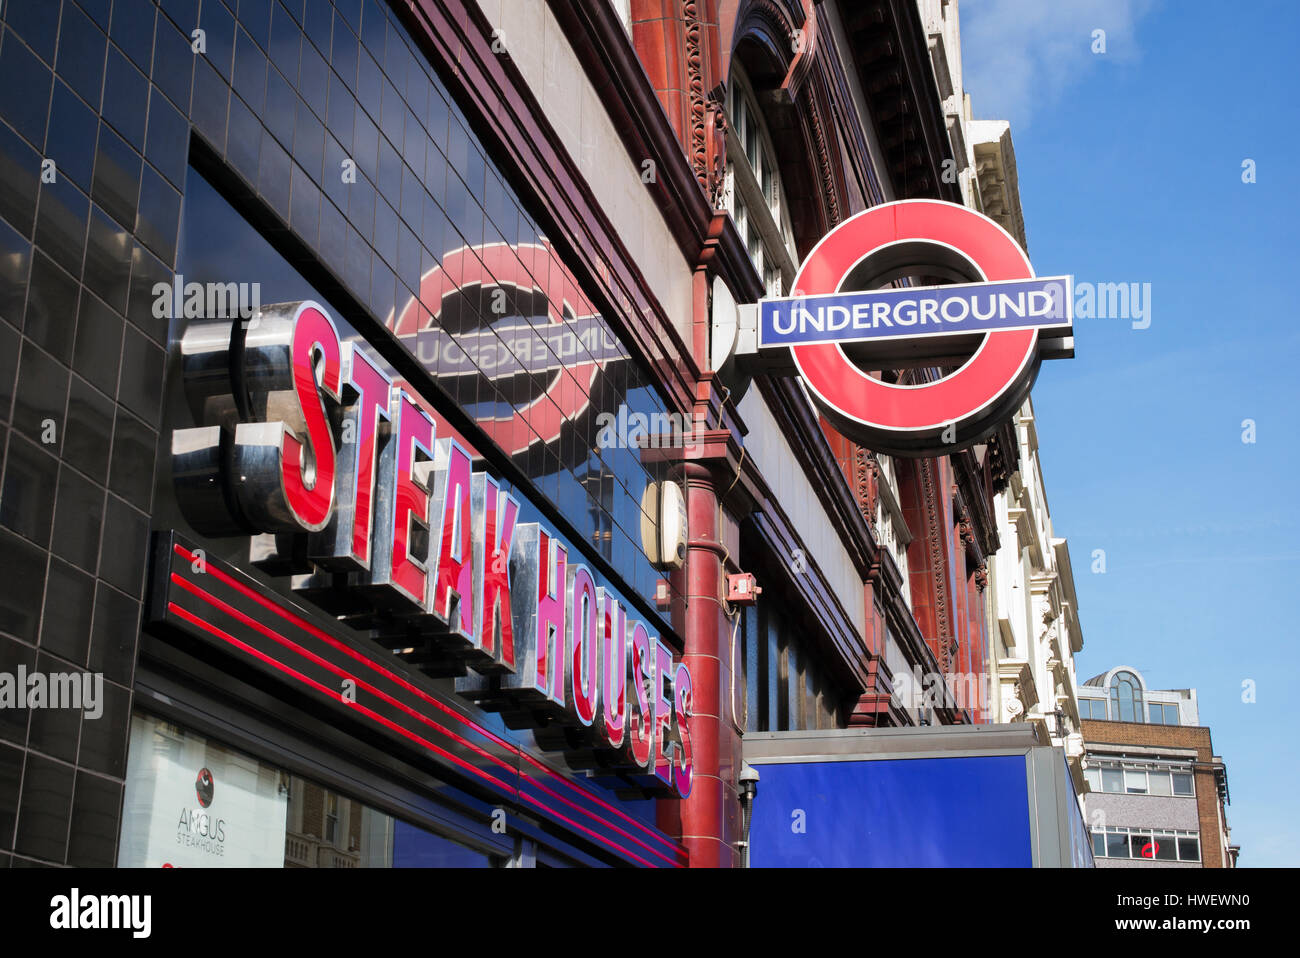 Colourful London signs. Steak houses and underground sign. London, UK Stock Photo